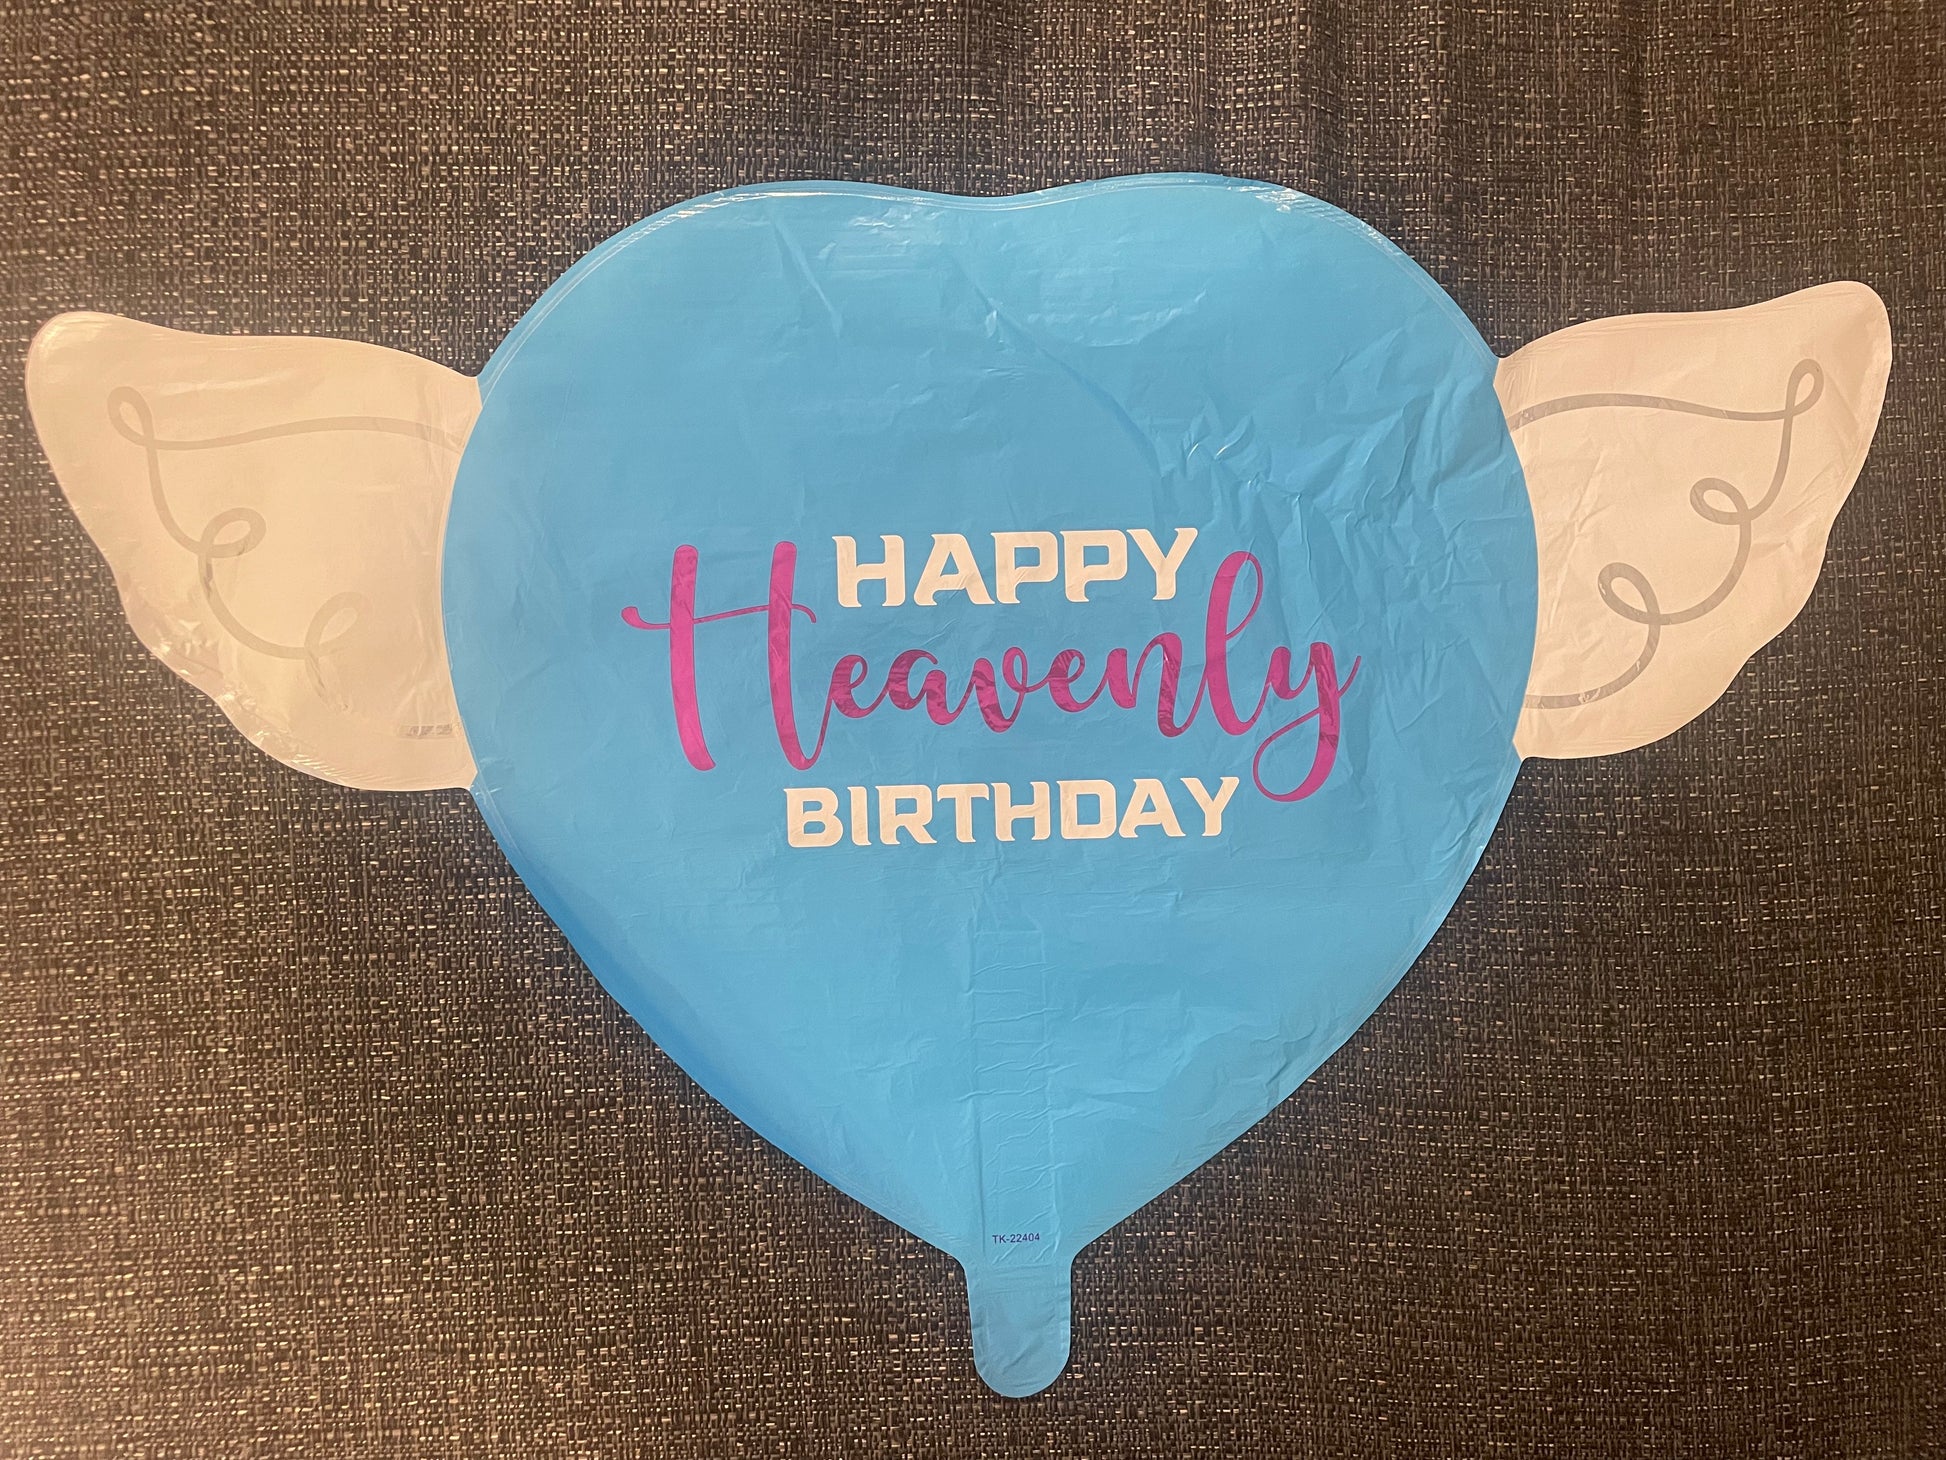 Happy Heavenly Birthday Heart Shaped Balloons with angel wings